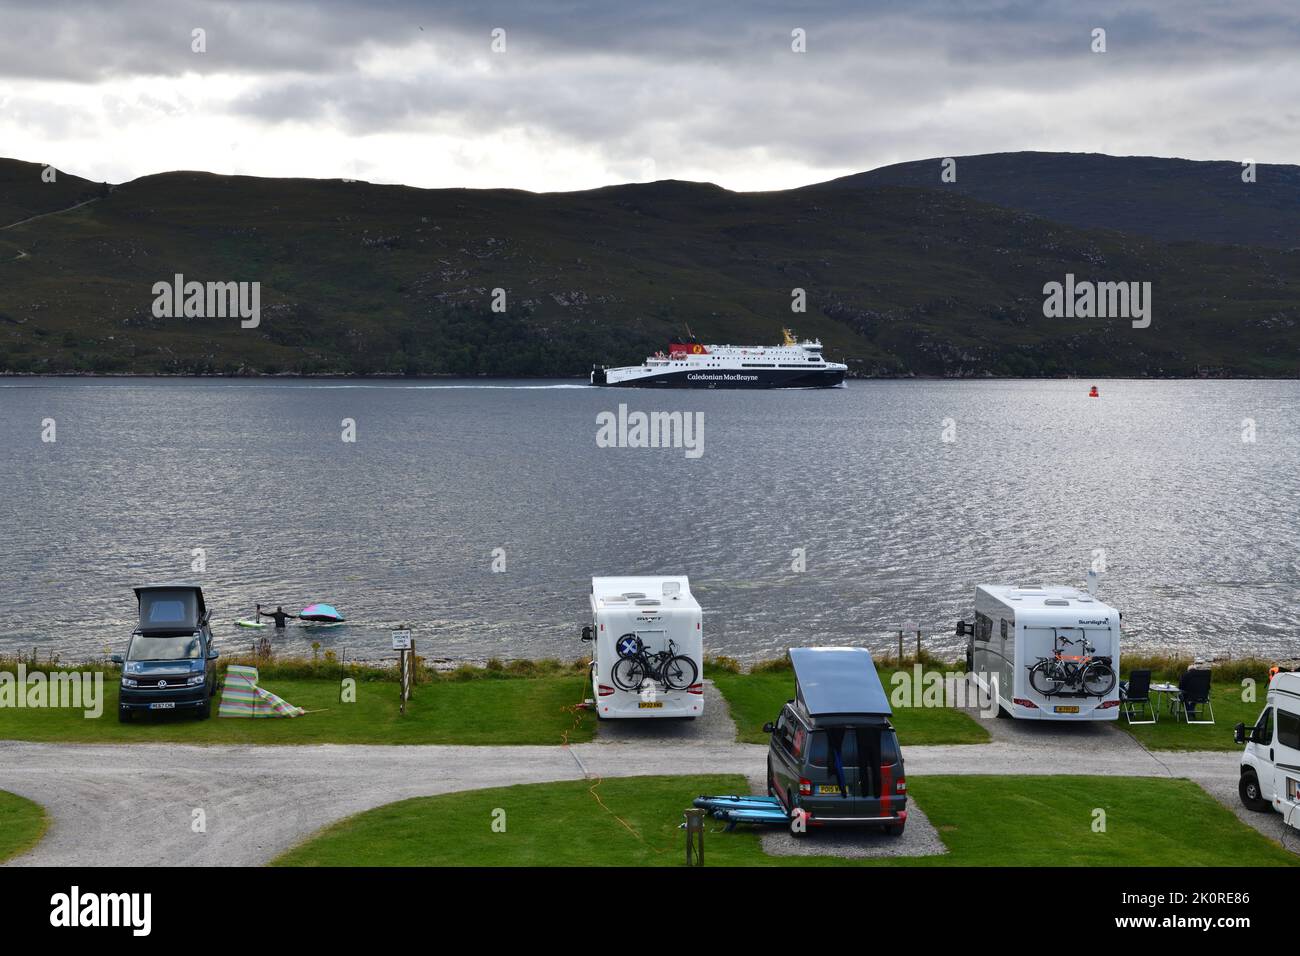 The Caledonian MacBrayne ferry leaving Ullapool bound for Stornoway in the outer Hebrides with campervans on the shoreline of Loch Broom. Stock Photo